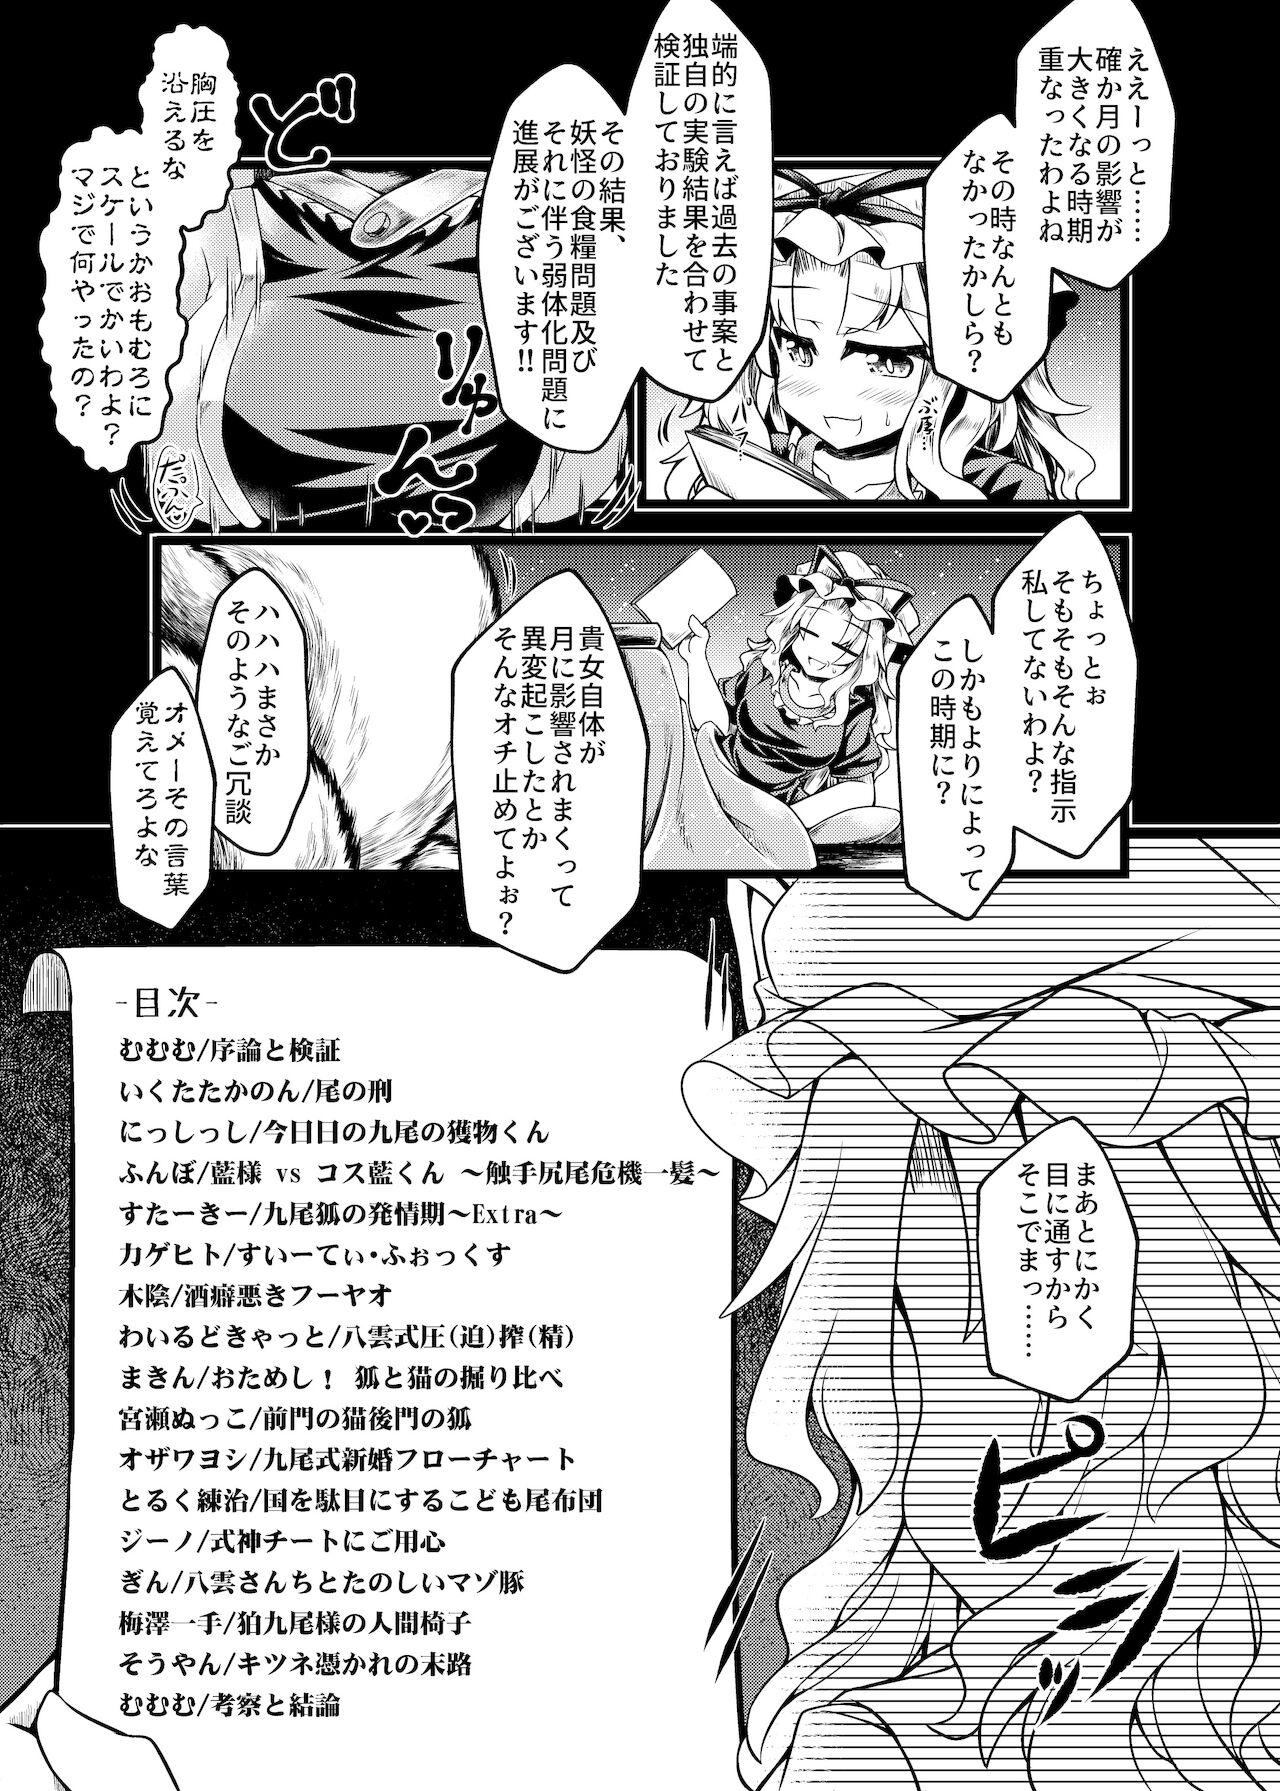 Red Head 嫐九尾の搾精報告 - Touhou project Brother Sister - Page 5